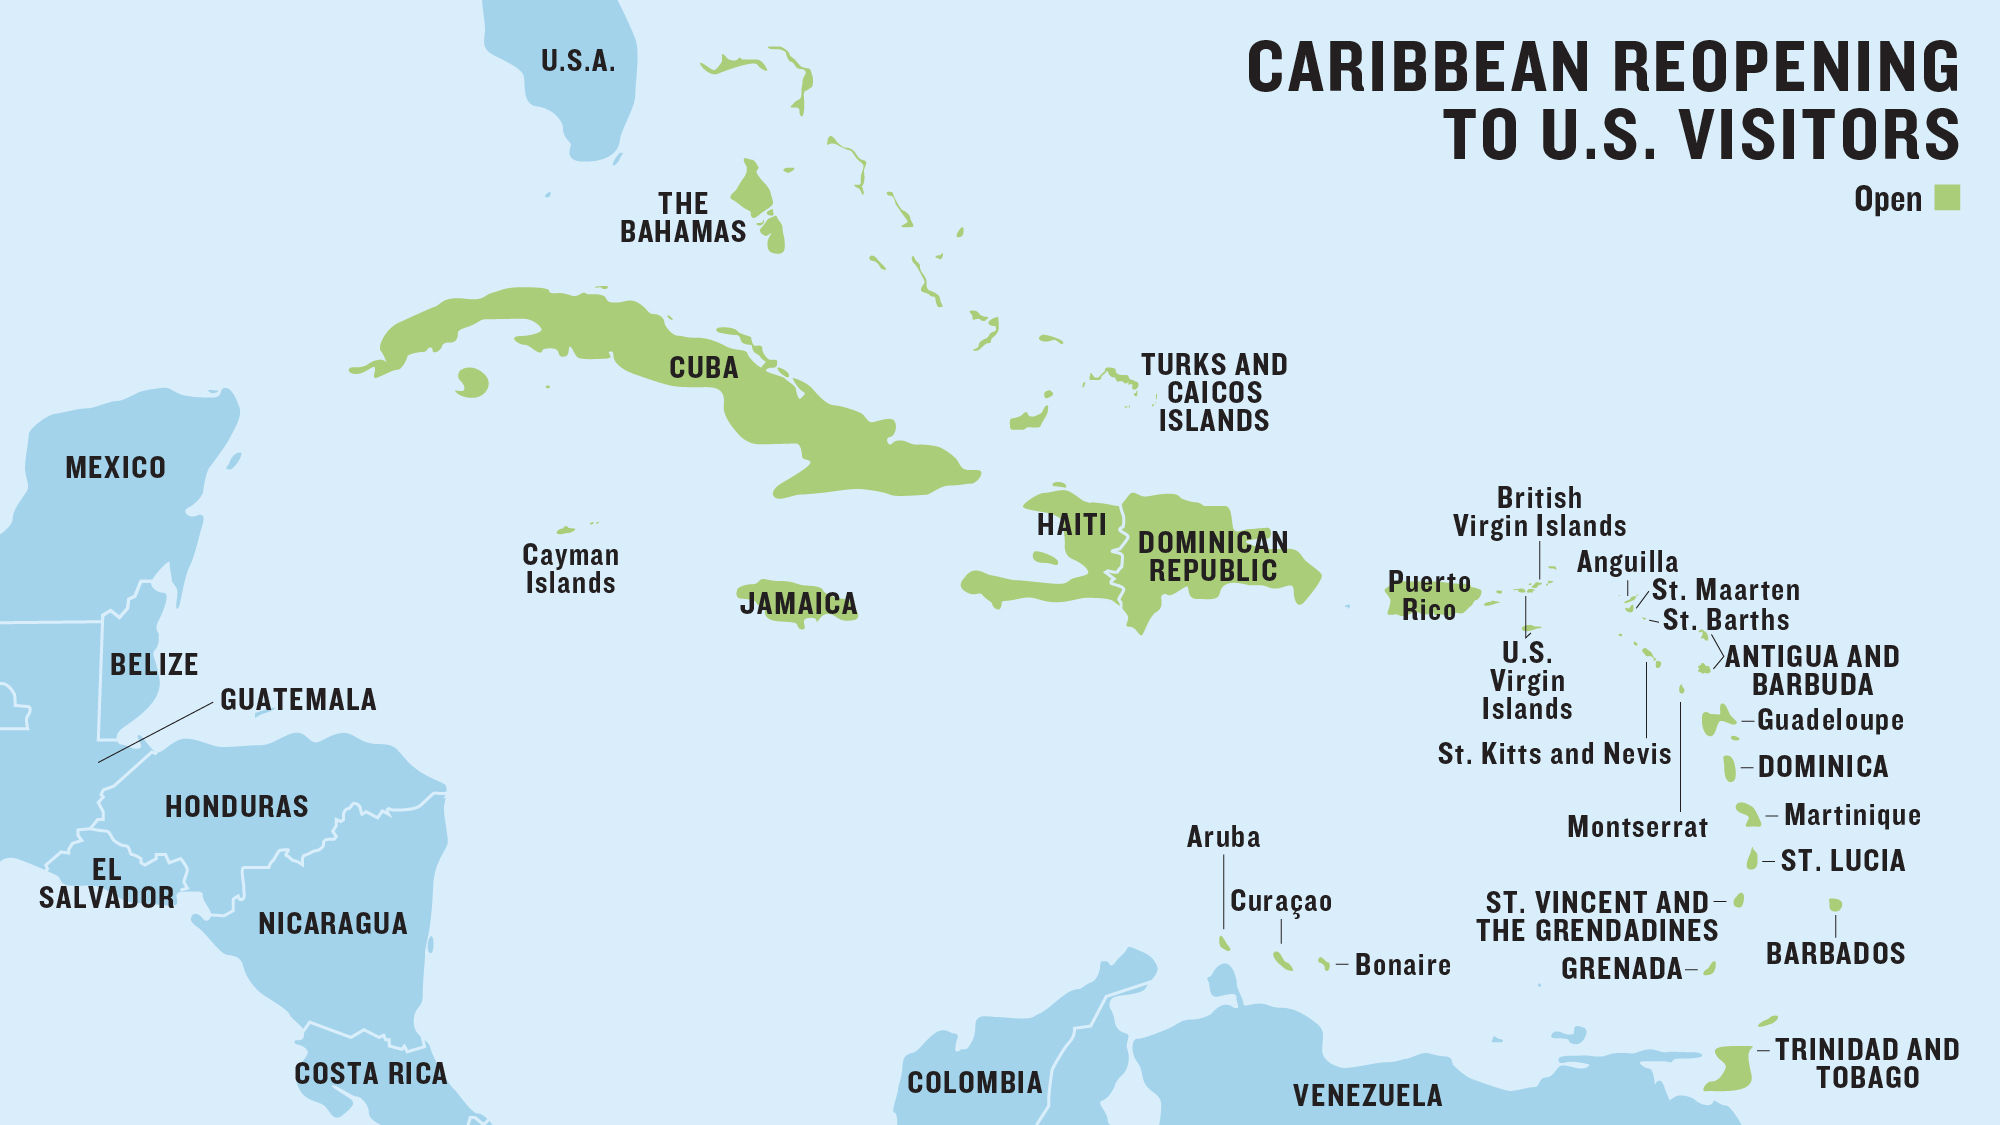 The latest on travel to the Caribbean: Requirements for U.S. travelers